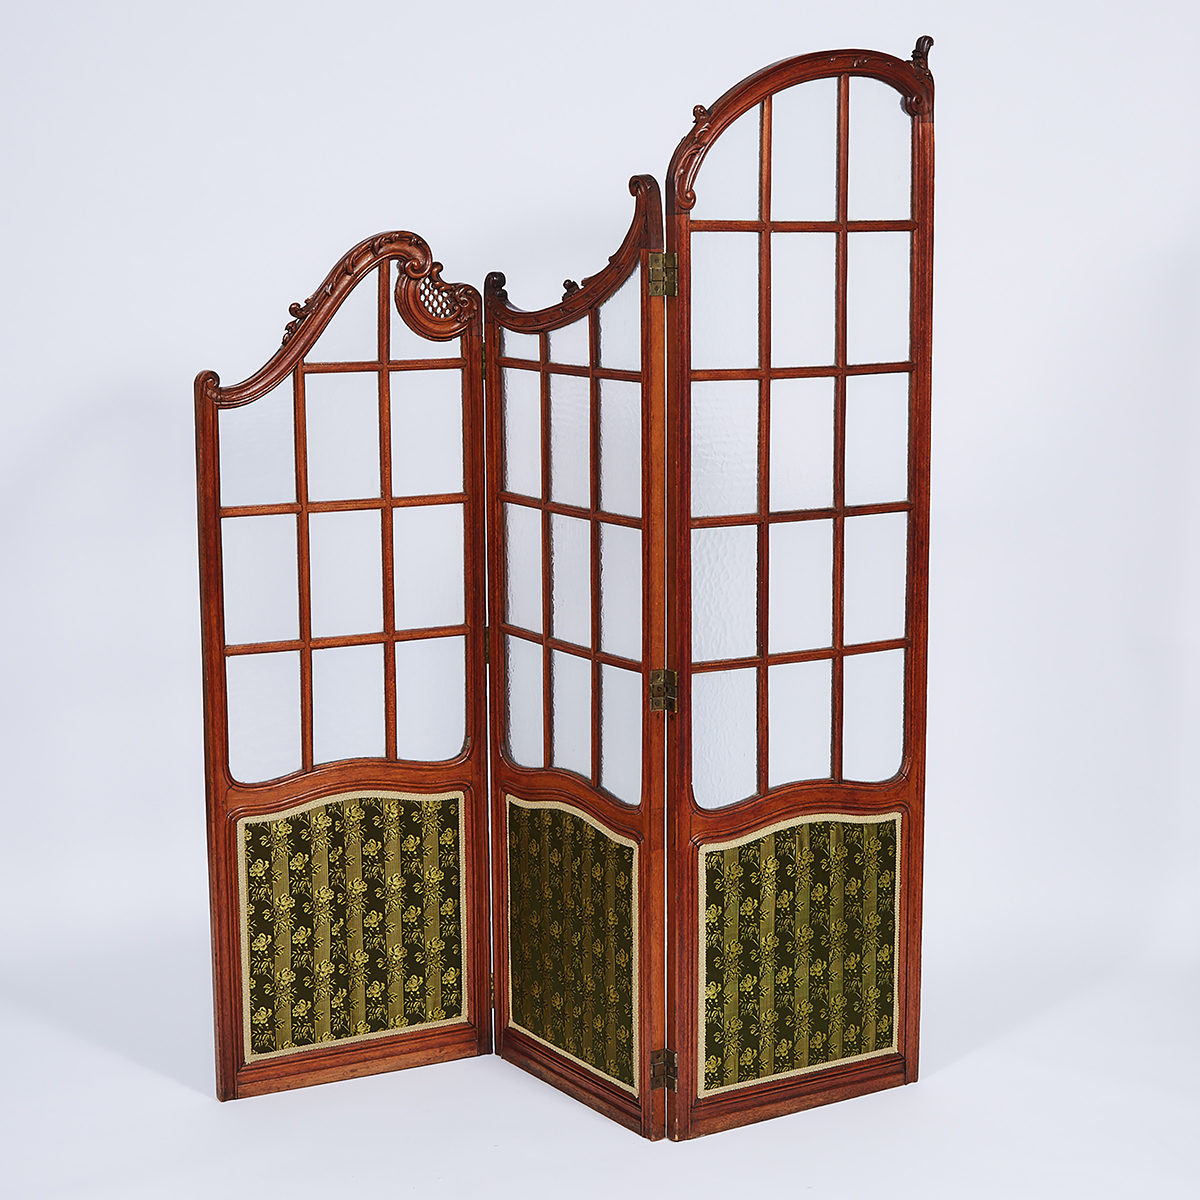 French Carved Walnut Glazed and Upholstered Folding Screen, 19th century